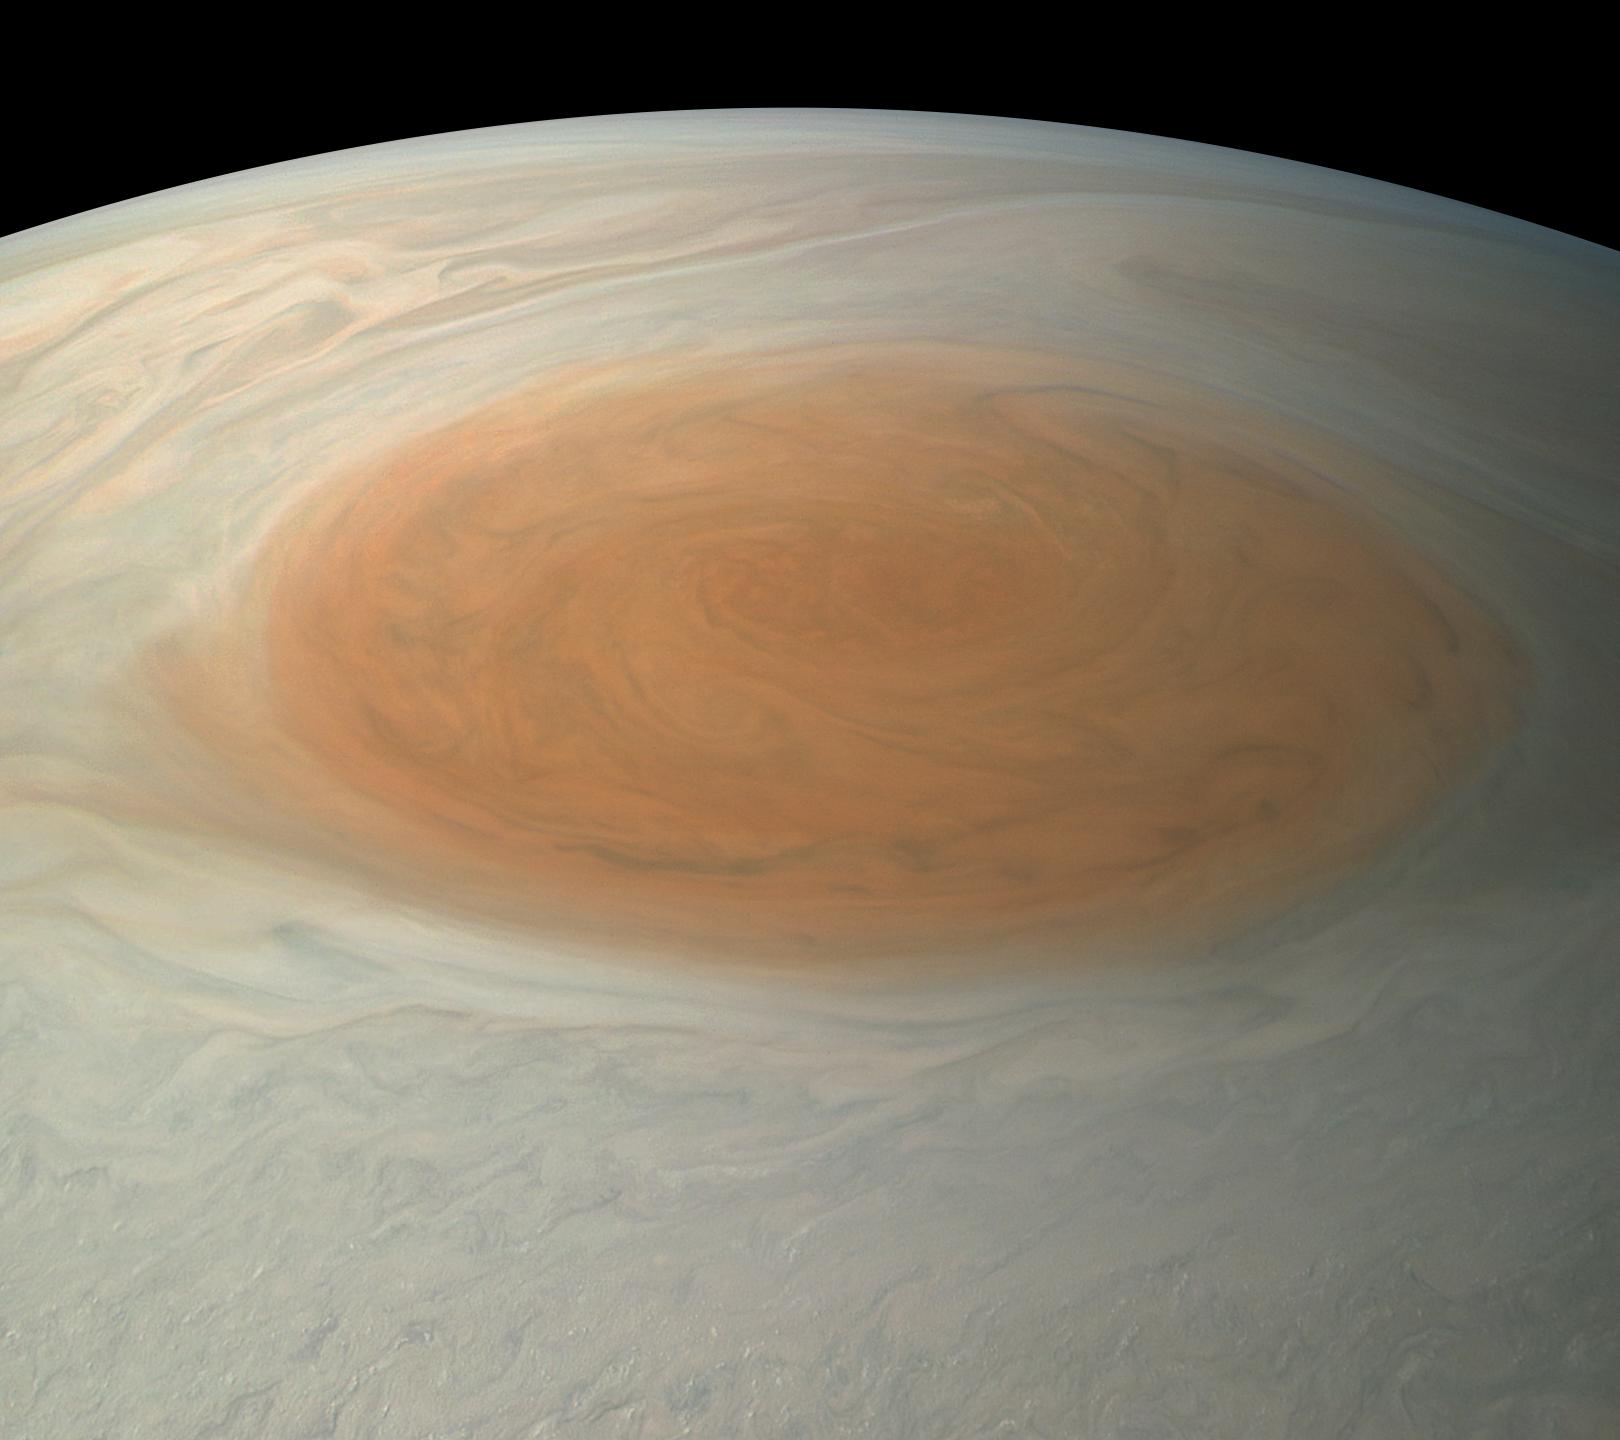 This image of Jupiter's iconic Great Red Spot (GRS) was created by citizen scientist Björn Jónsson using data from the JunoCam imager on NASA's Juno spacecraft.